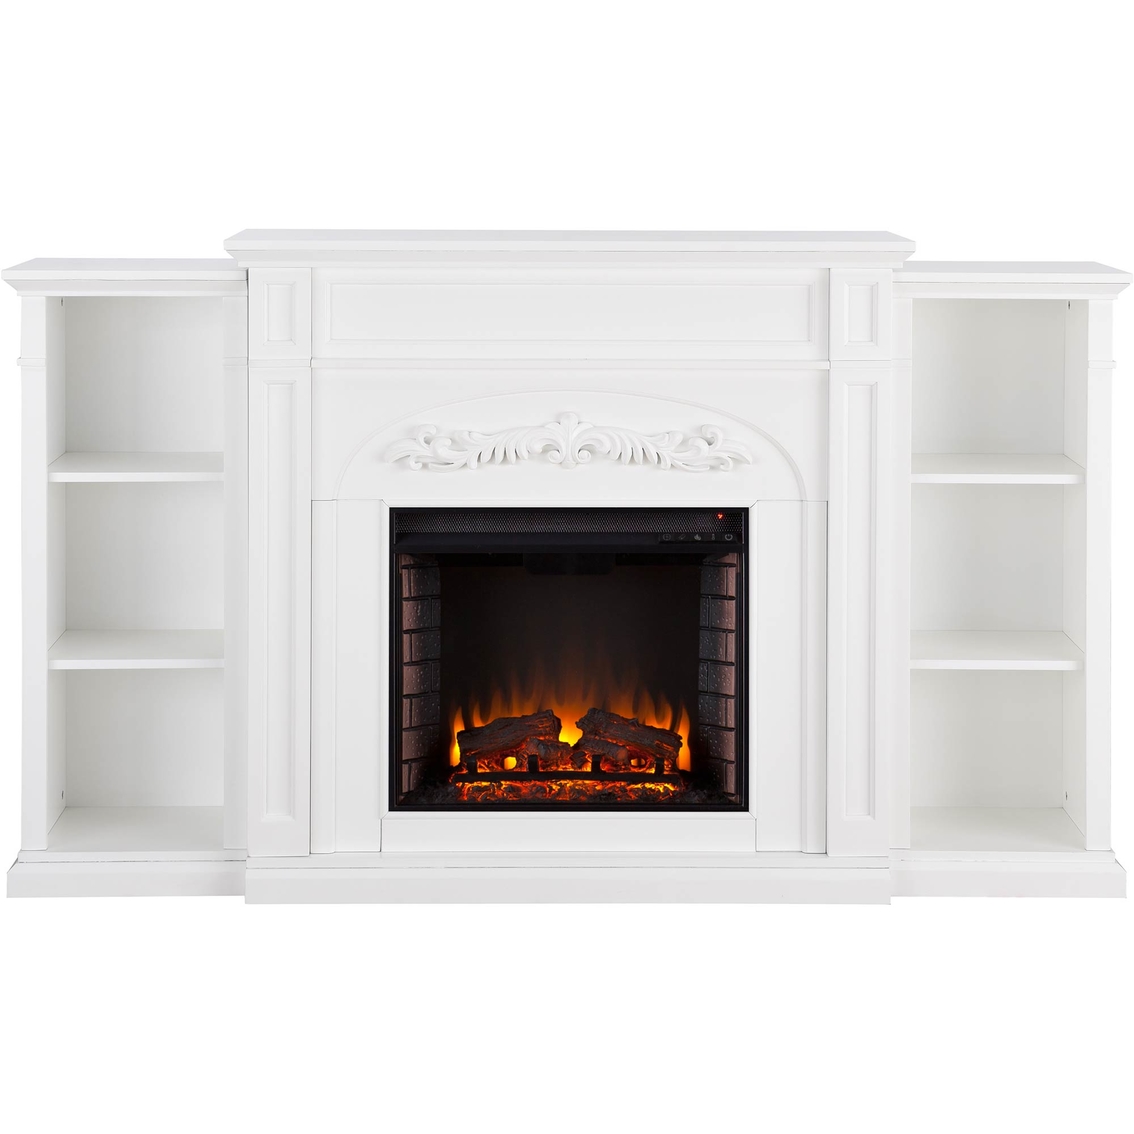 Southern Enterprises Chantilly Electric Fireplace - Image 2 of 4